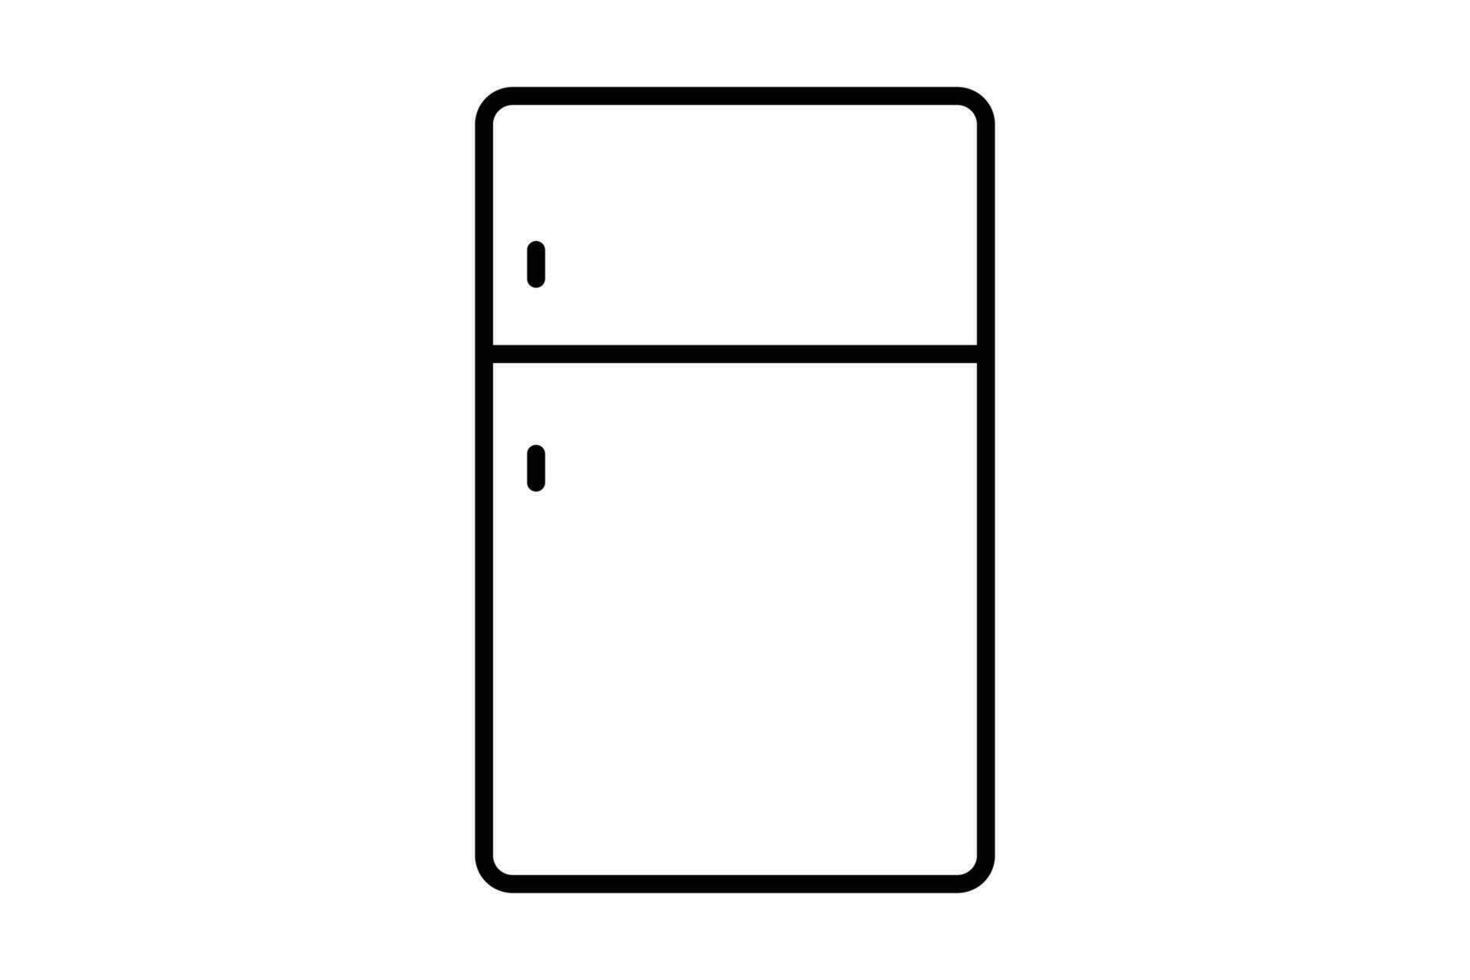 Refrigerator icon. icon related to electronic, Household appliances. Line icon style design. Simple vector design editable